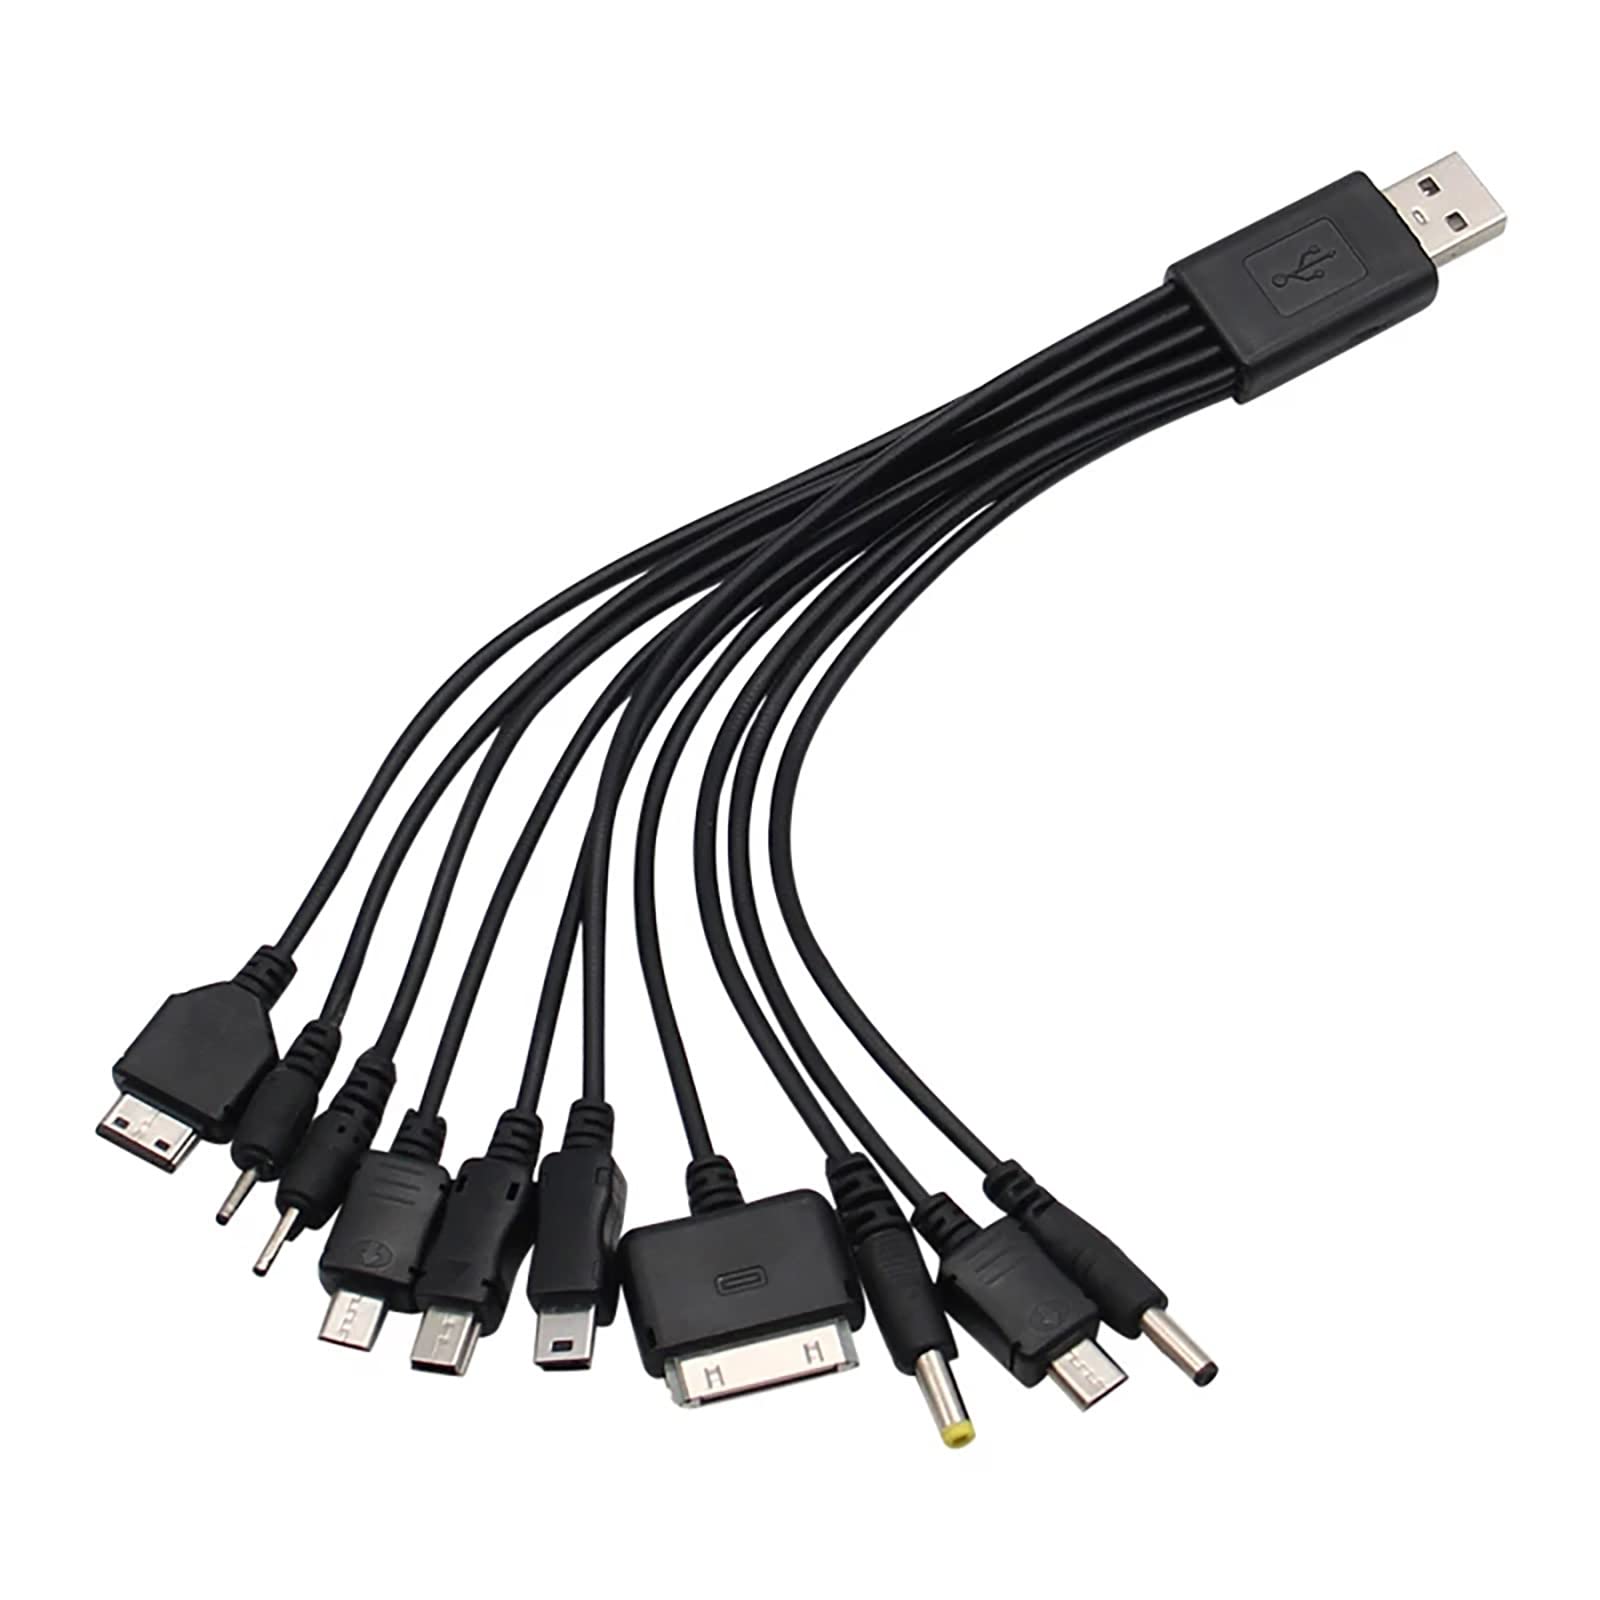 Diarypiece Universal 10 in 1 USB Cable Charger Adapter Cable, 20cm Data Cable Wire Cord